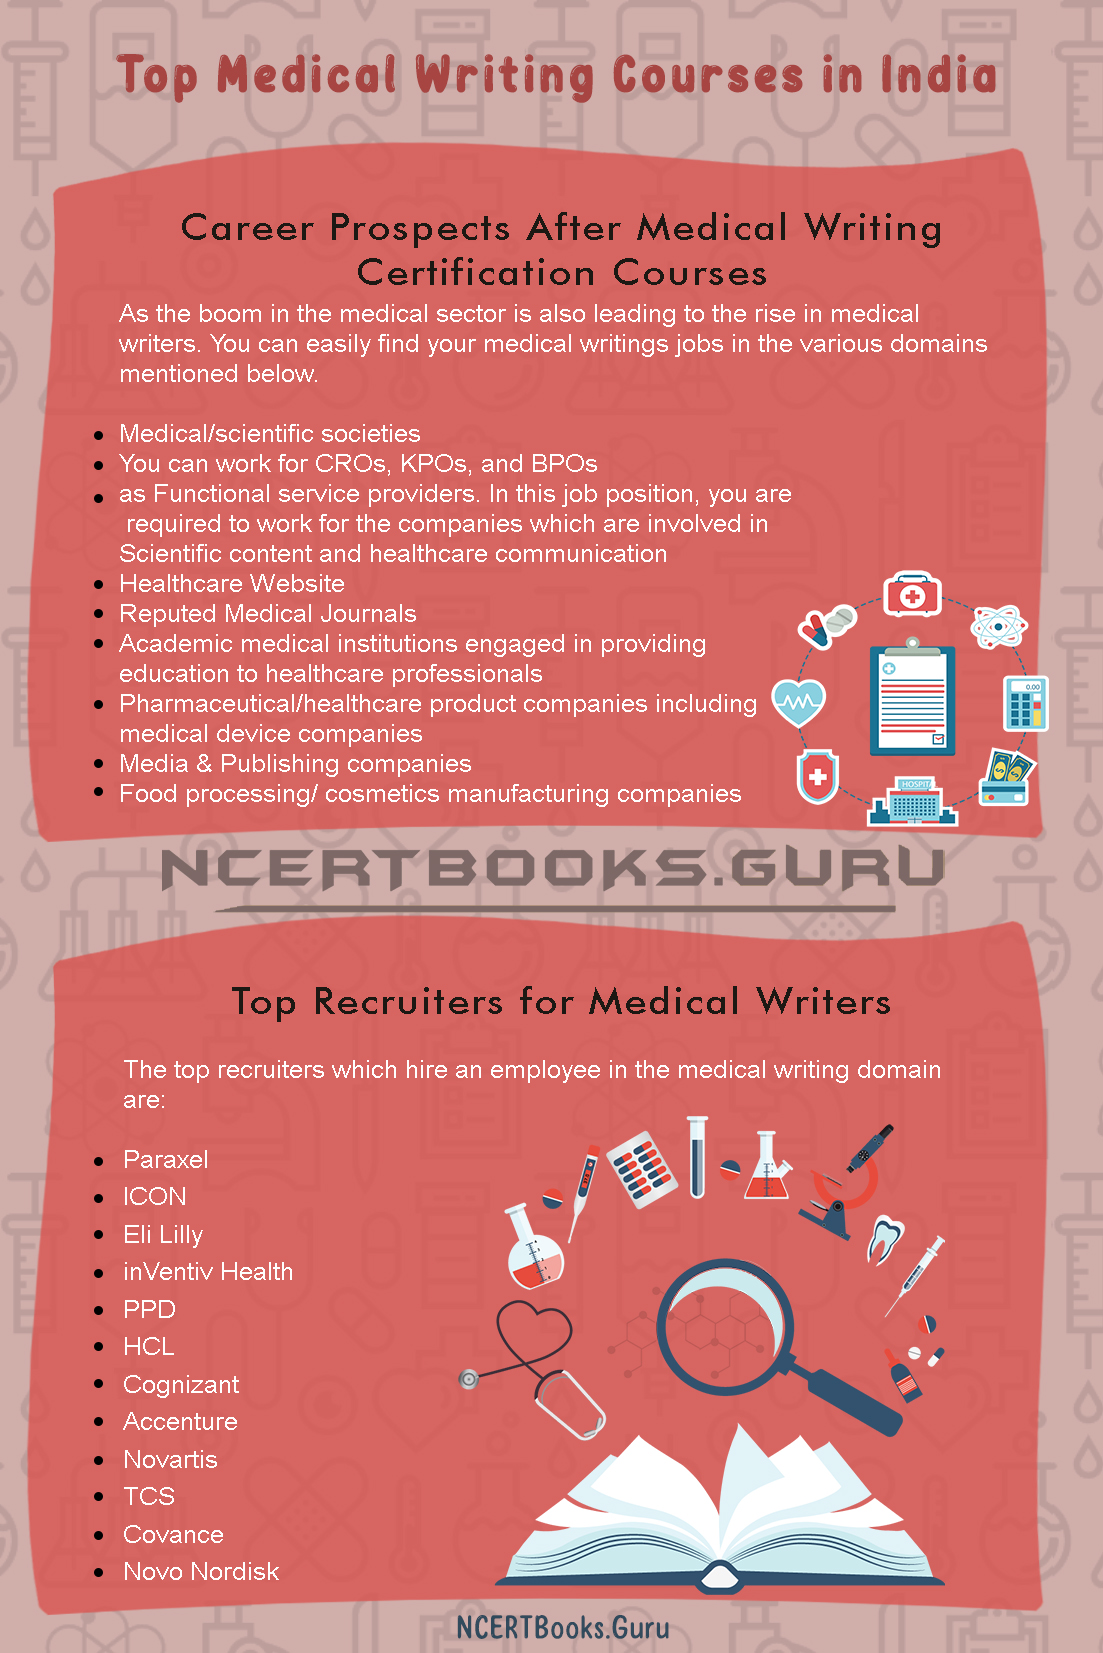 Top Medical Writing Courses in India 2